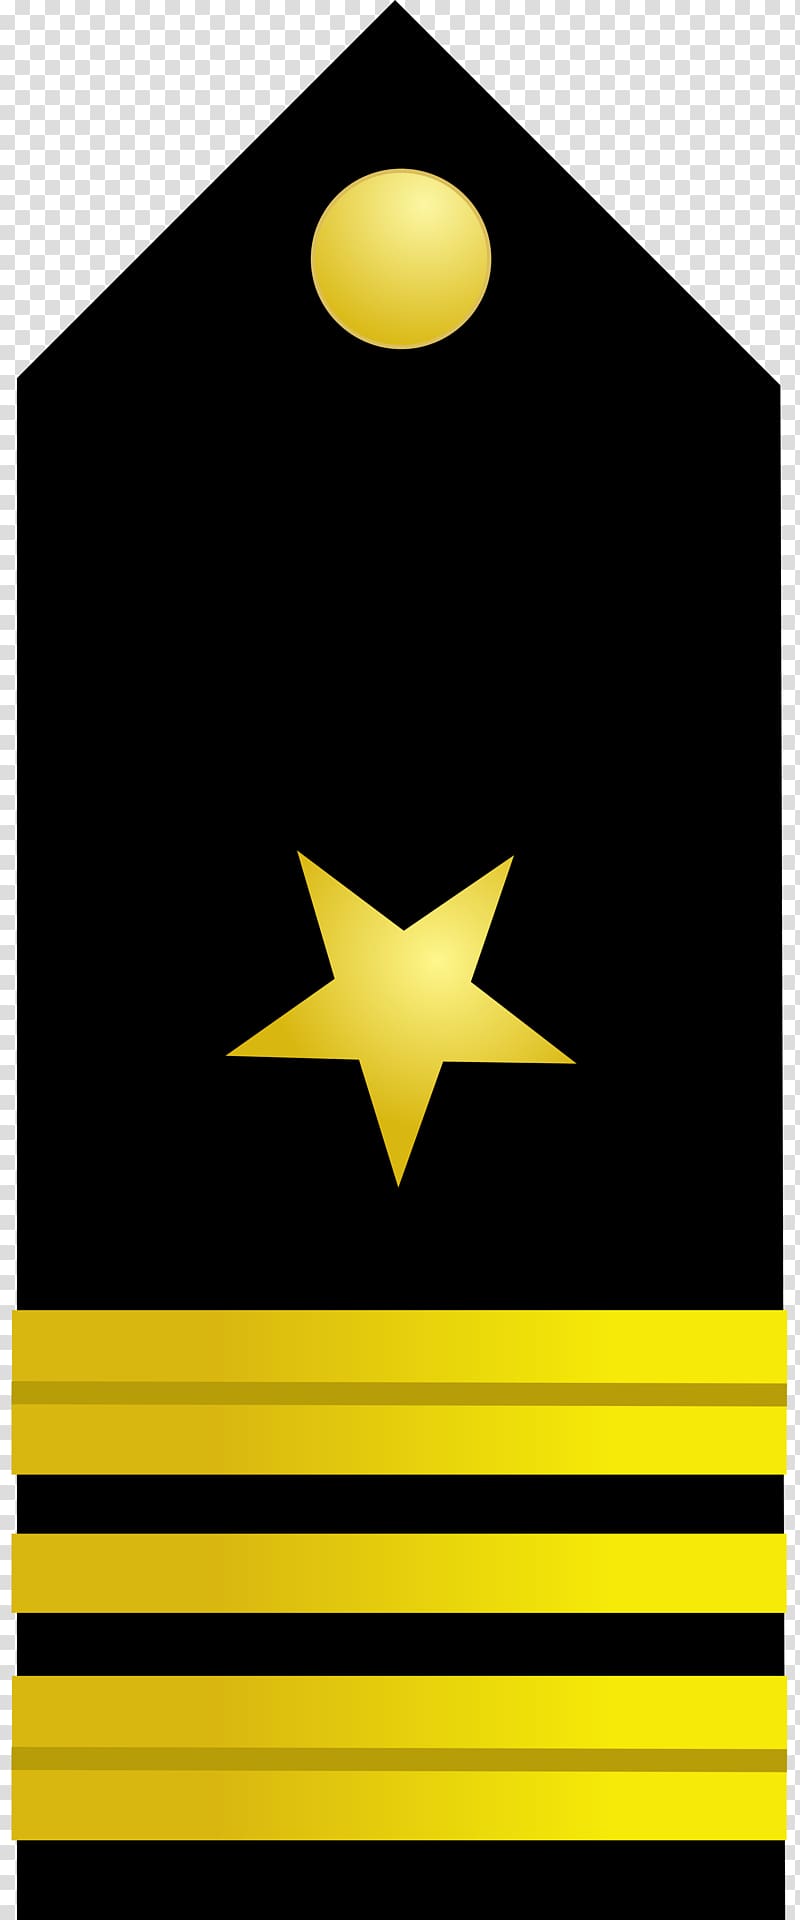 United States Navy officer rank insignia Ensign Military rank, rank-and-file transparent background PNG clipart